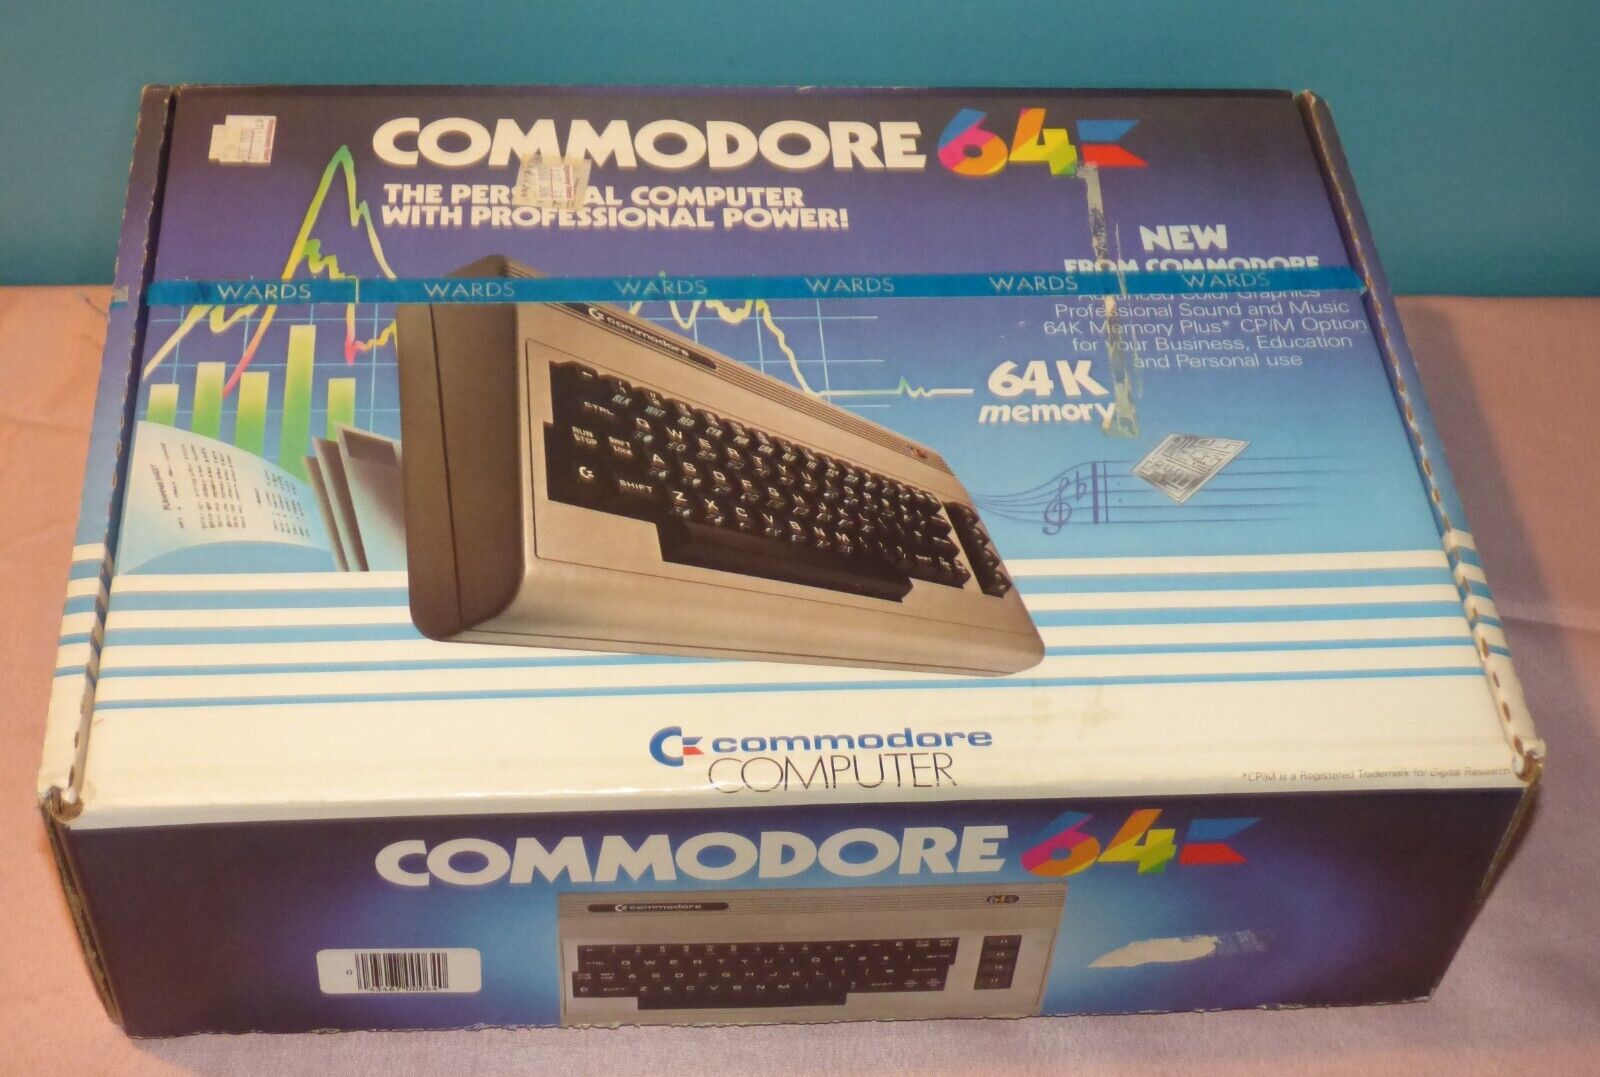 Vintage Commodore 64 Personal Computer System with Box & Manual